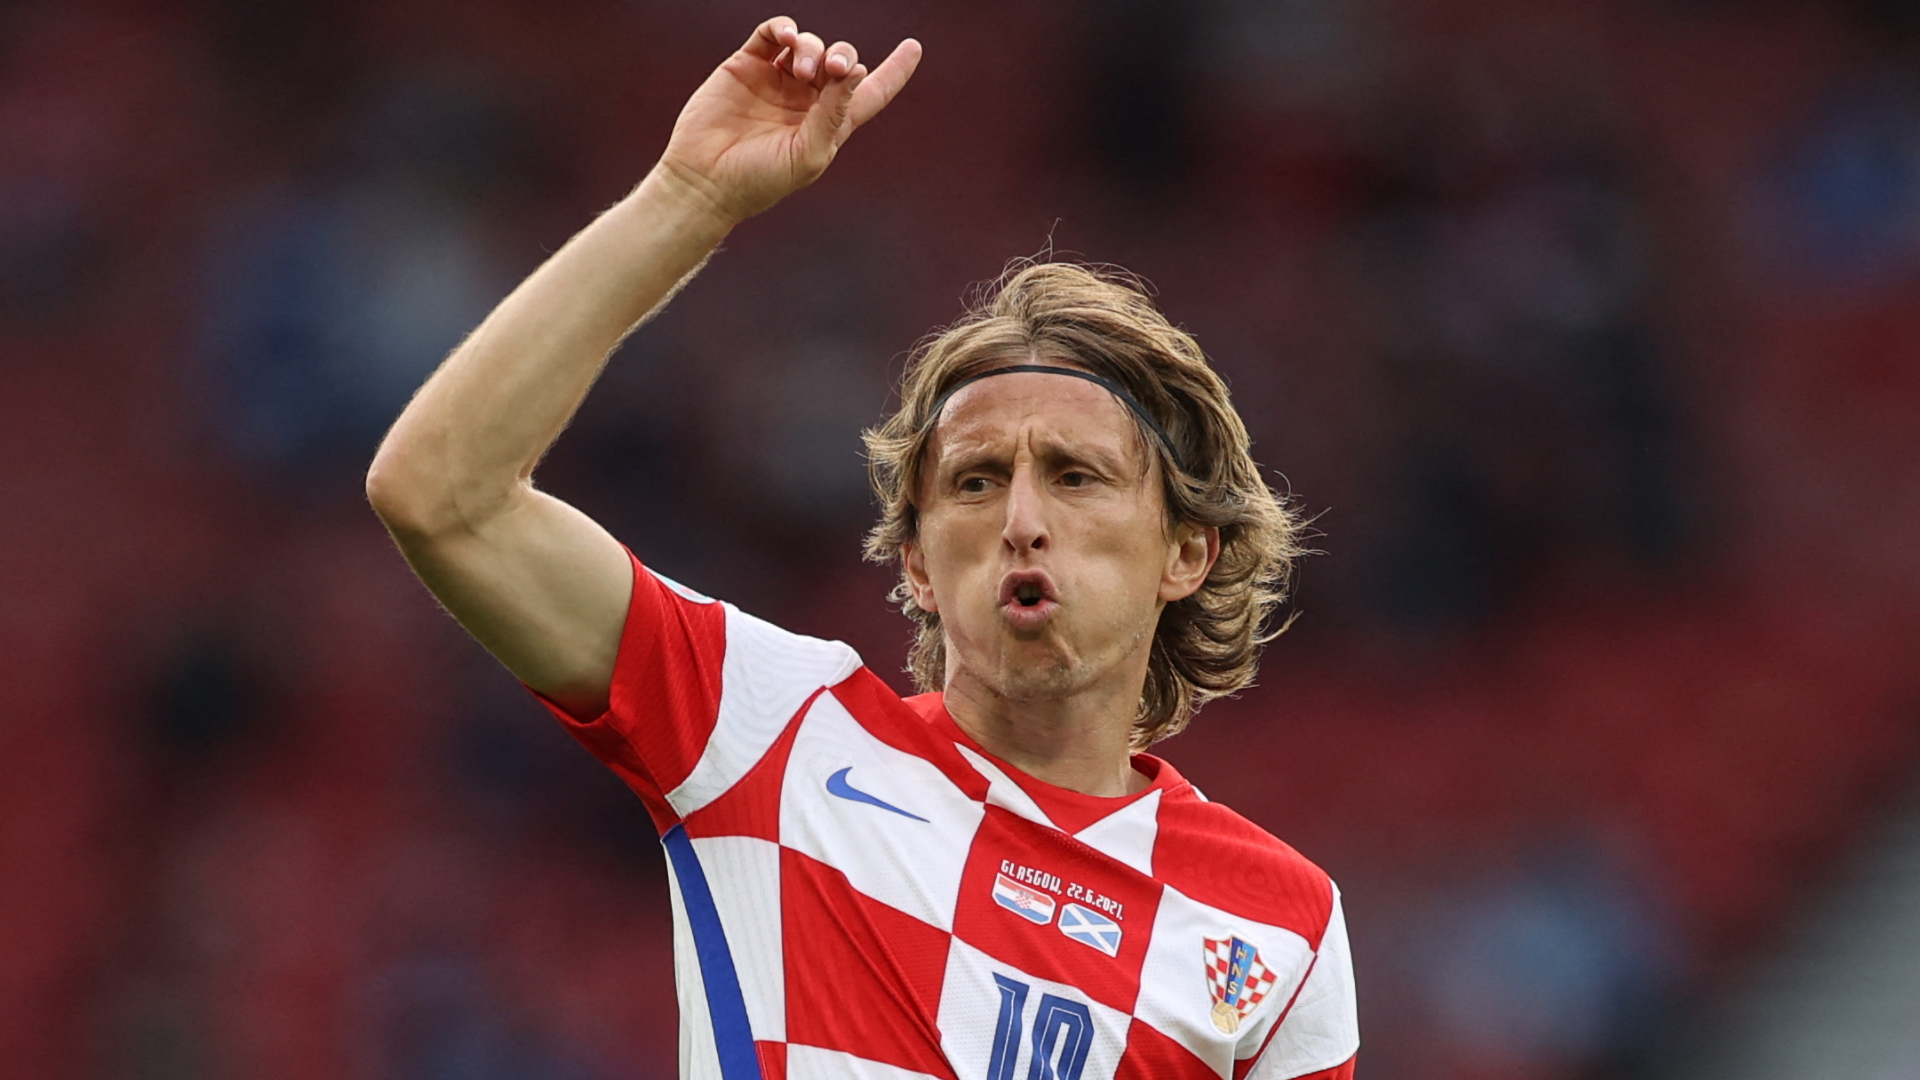 'Modric gets serious when we play young vs old in training' - Croatia striker Budimir hails Real Madrid star's influence